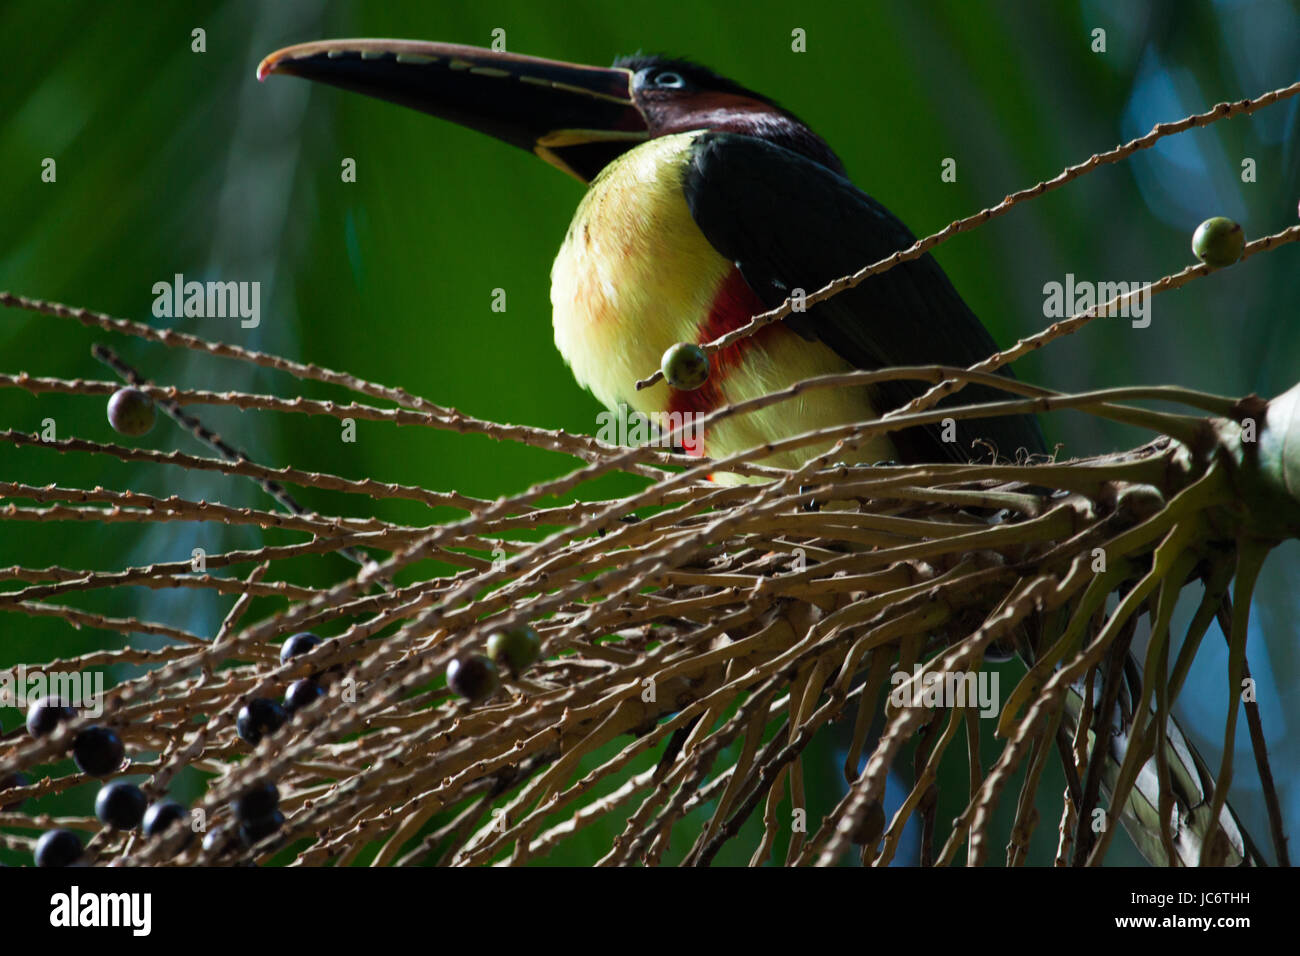 Colorful bird: Green-billed toucan (Ramphastos dicolorus), or red-breasted toucan. Stock Photo